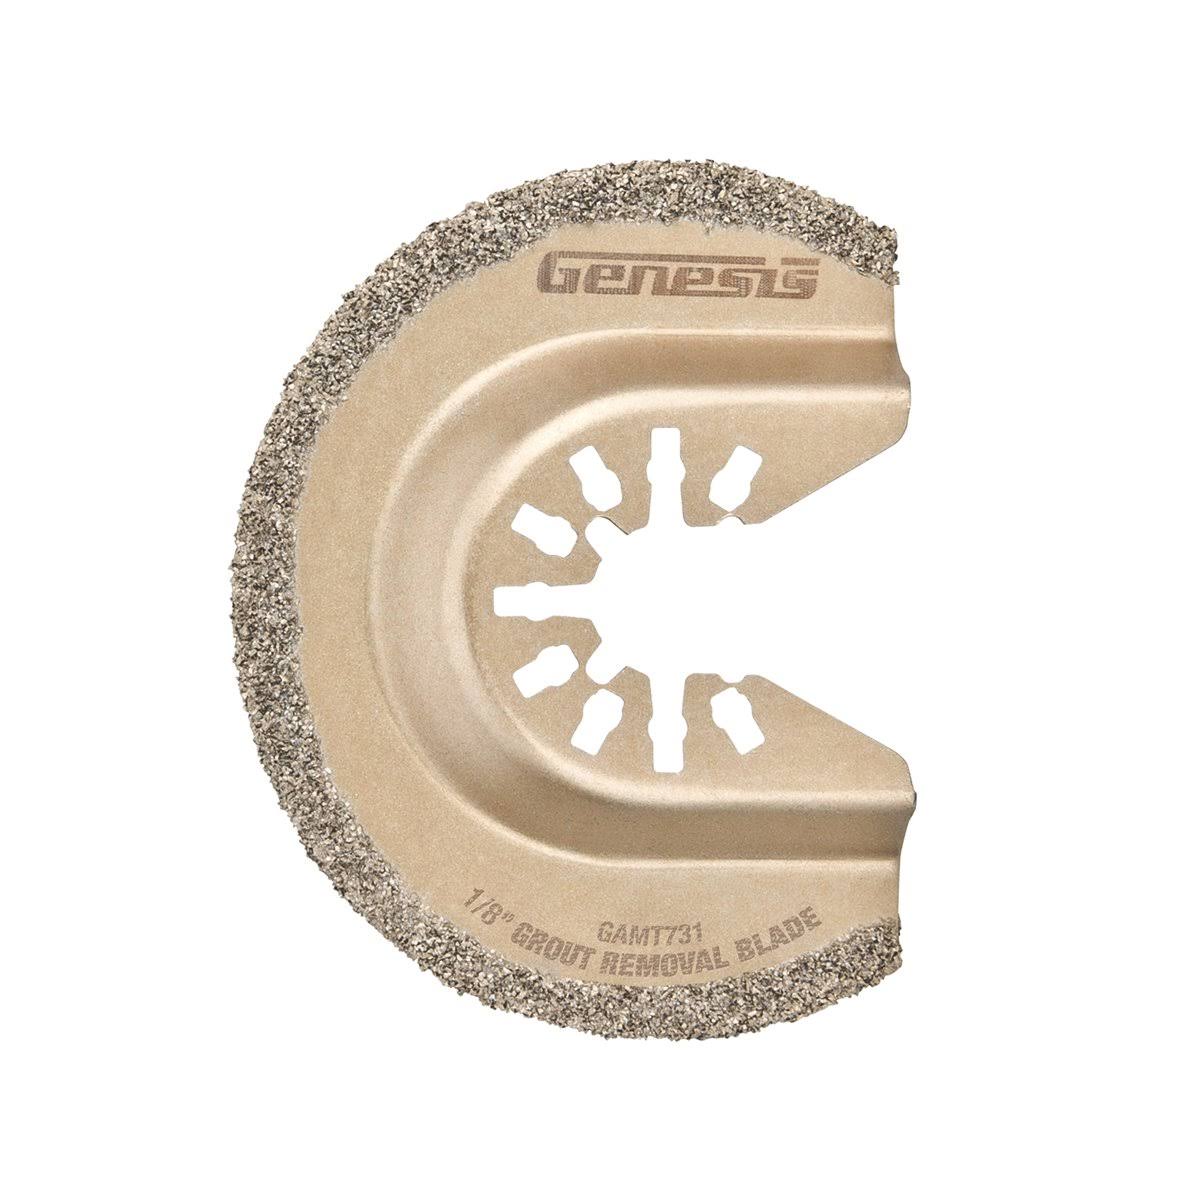 Genesis Grout Removal Blade - 1/8"